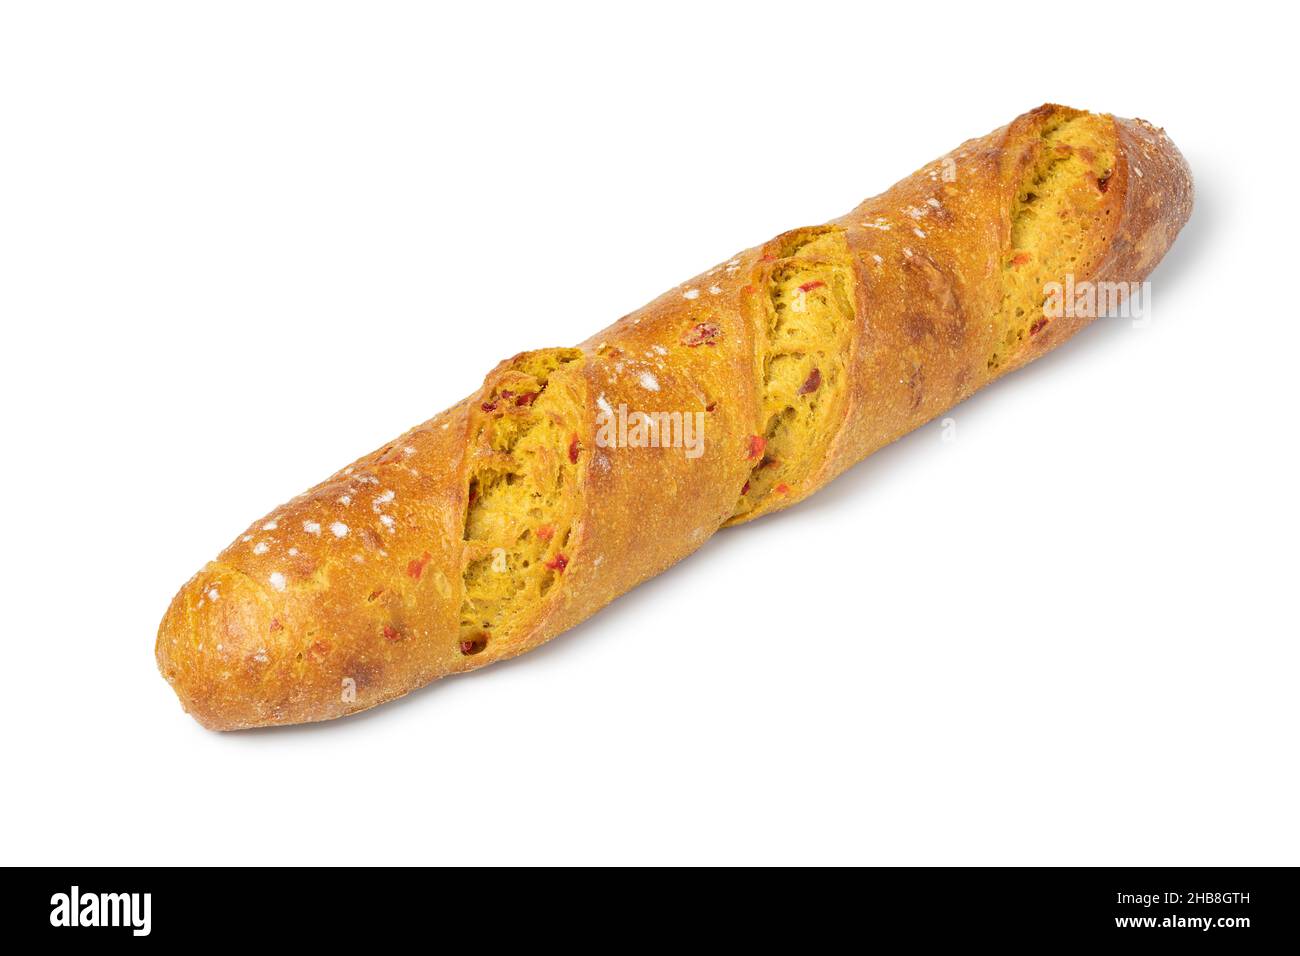 Single fresh baked homemade baguette with curry and tomato seasoning isolated on white background Stock Photo